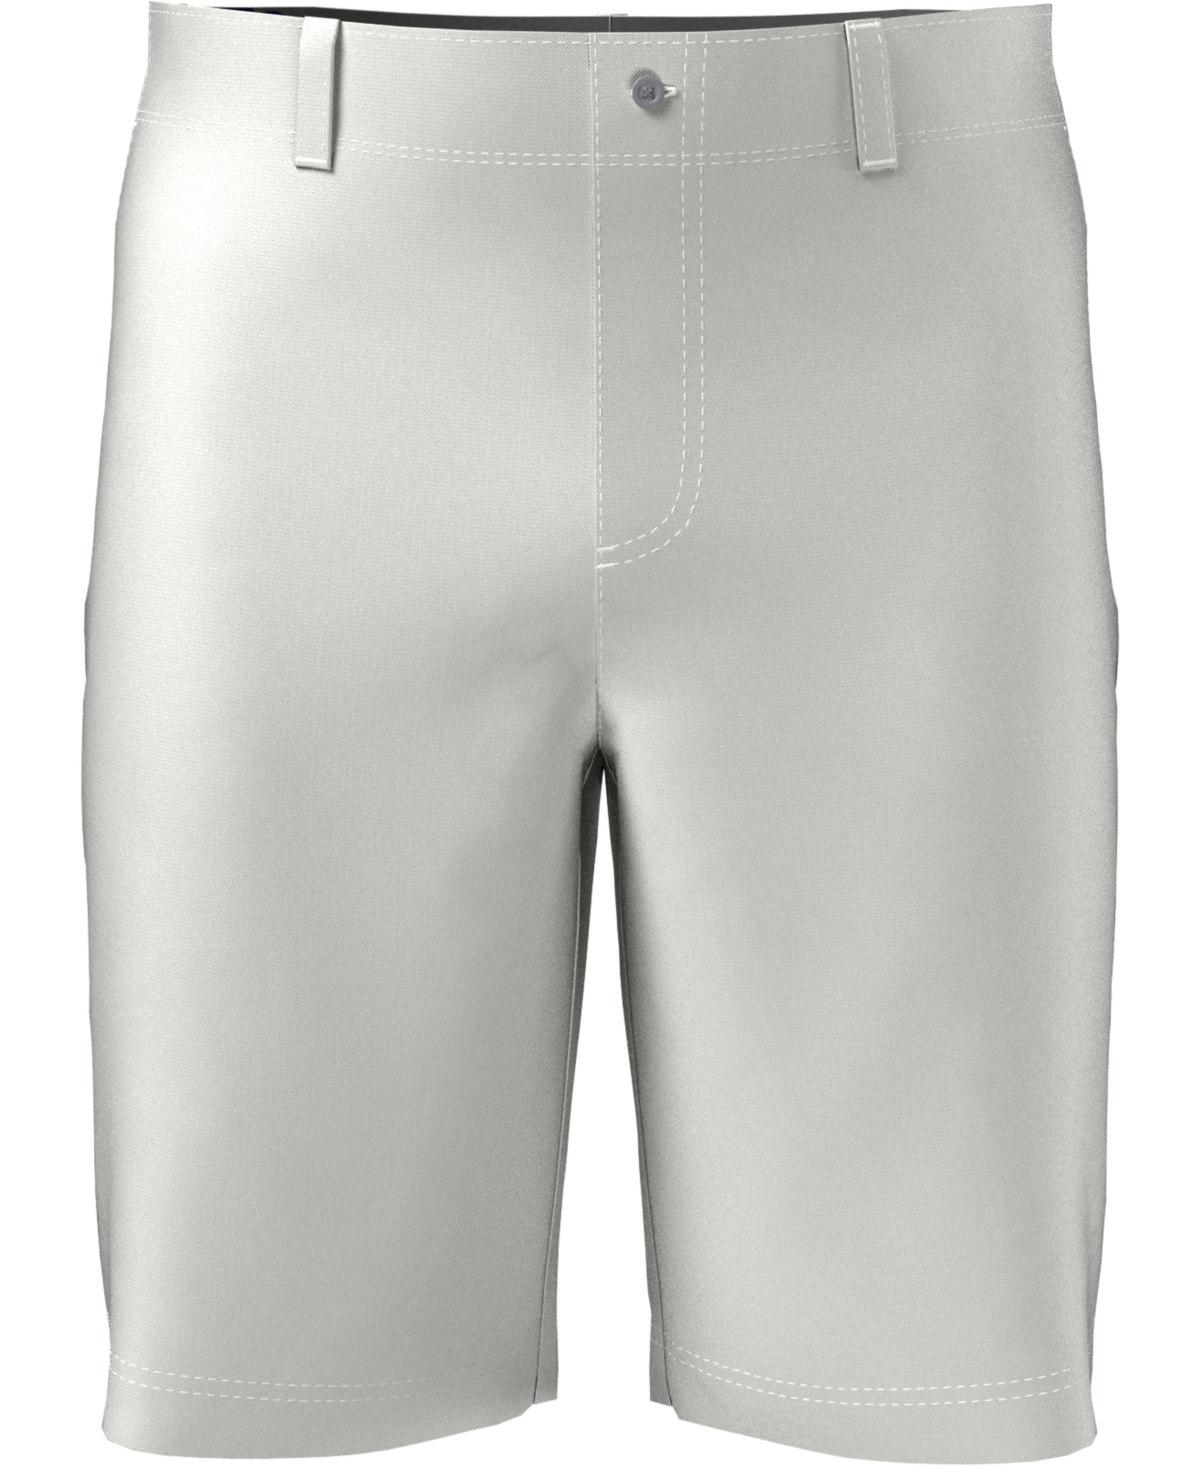 Pga Tour Big Boys Flat Front Solid Golf Shorts In Bright Whi